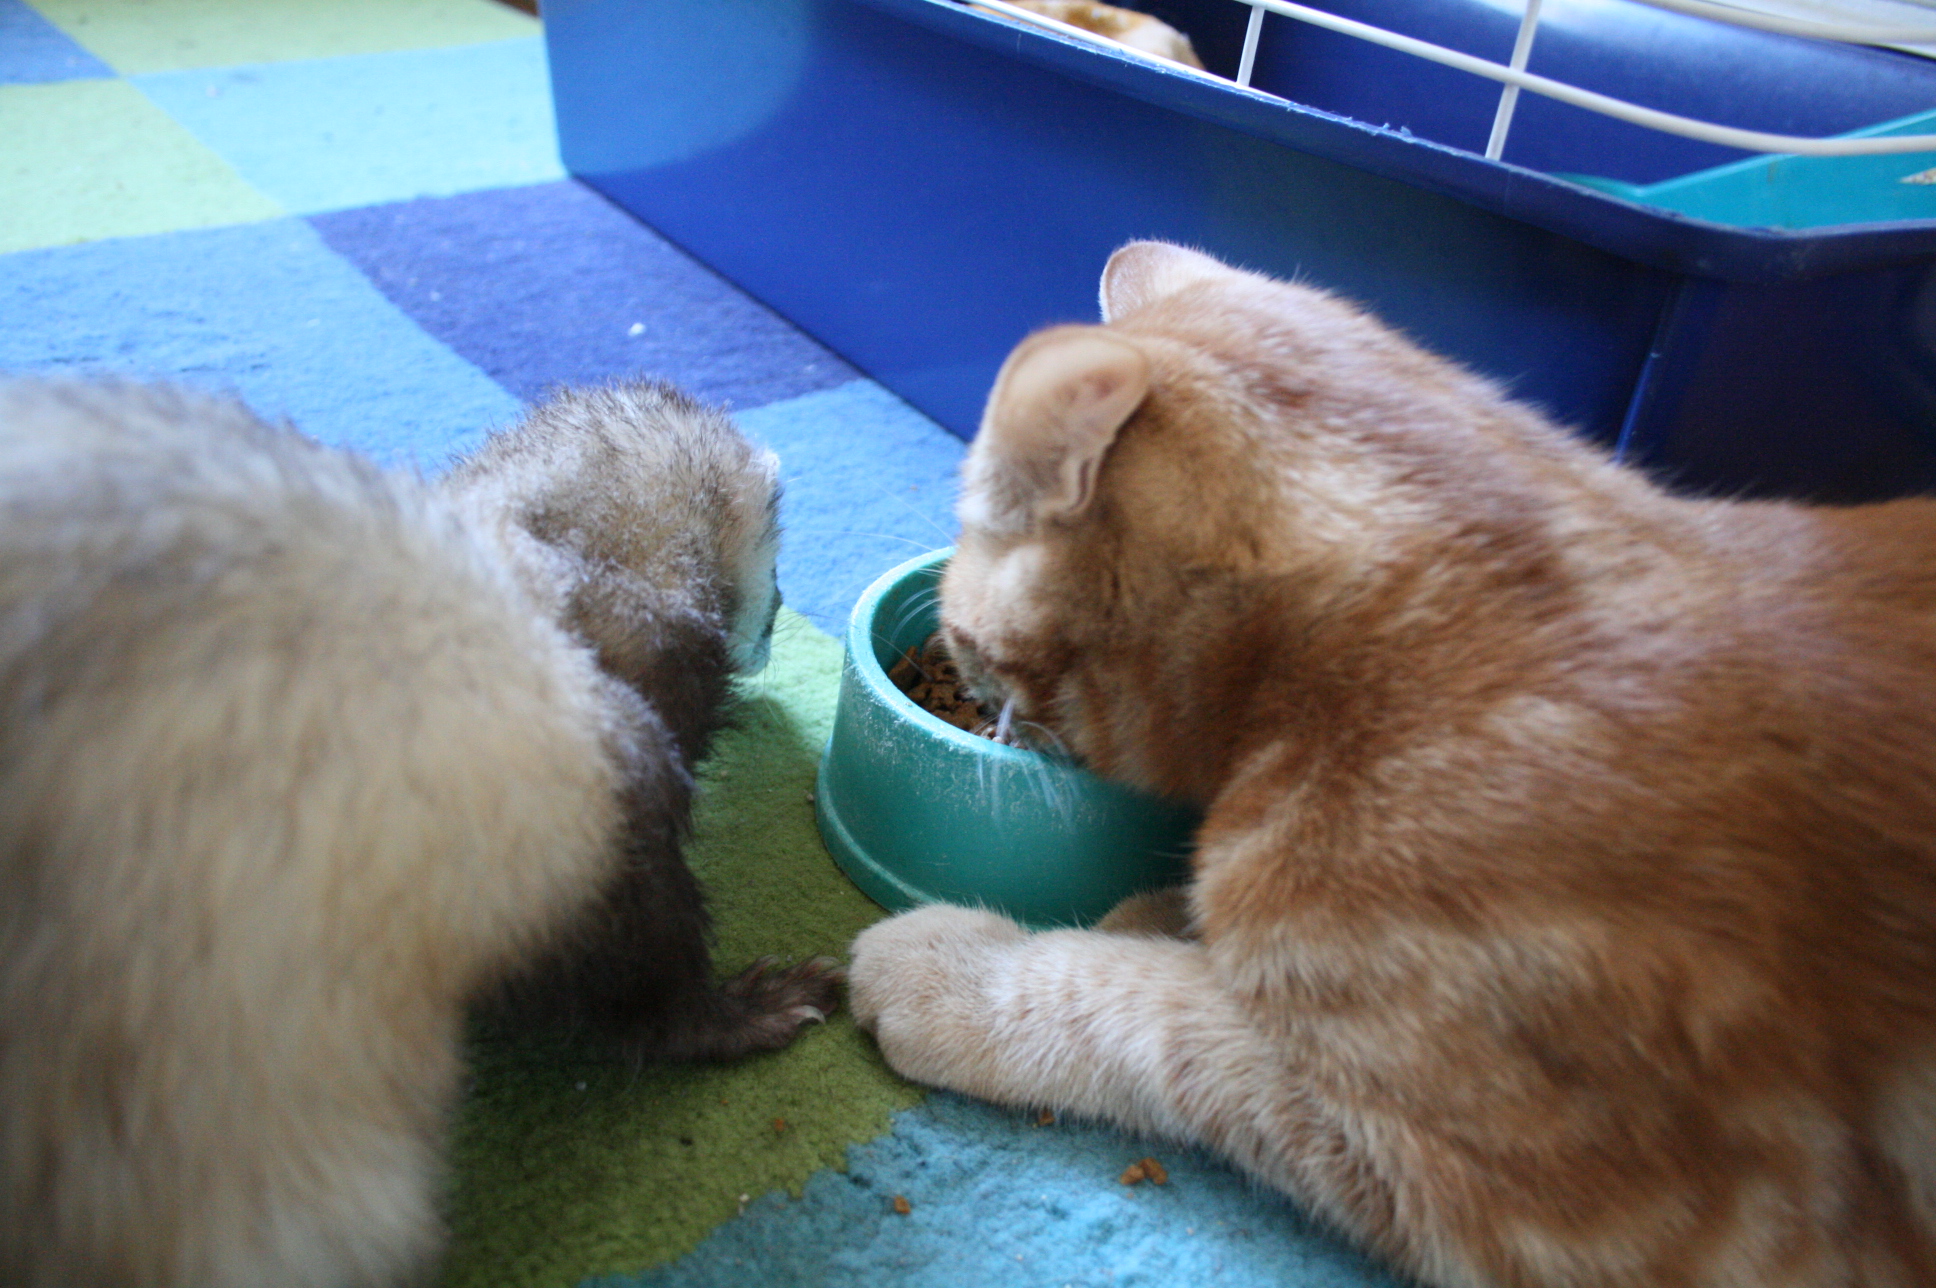 a close up of two small cats eating out of bowls